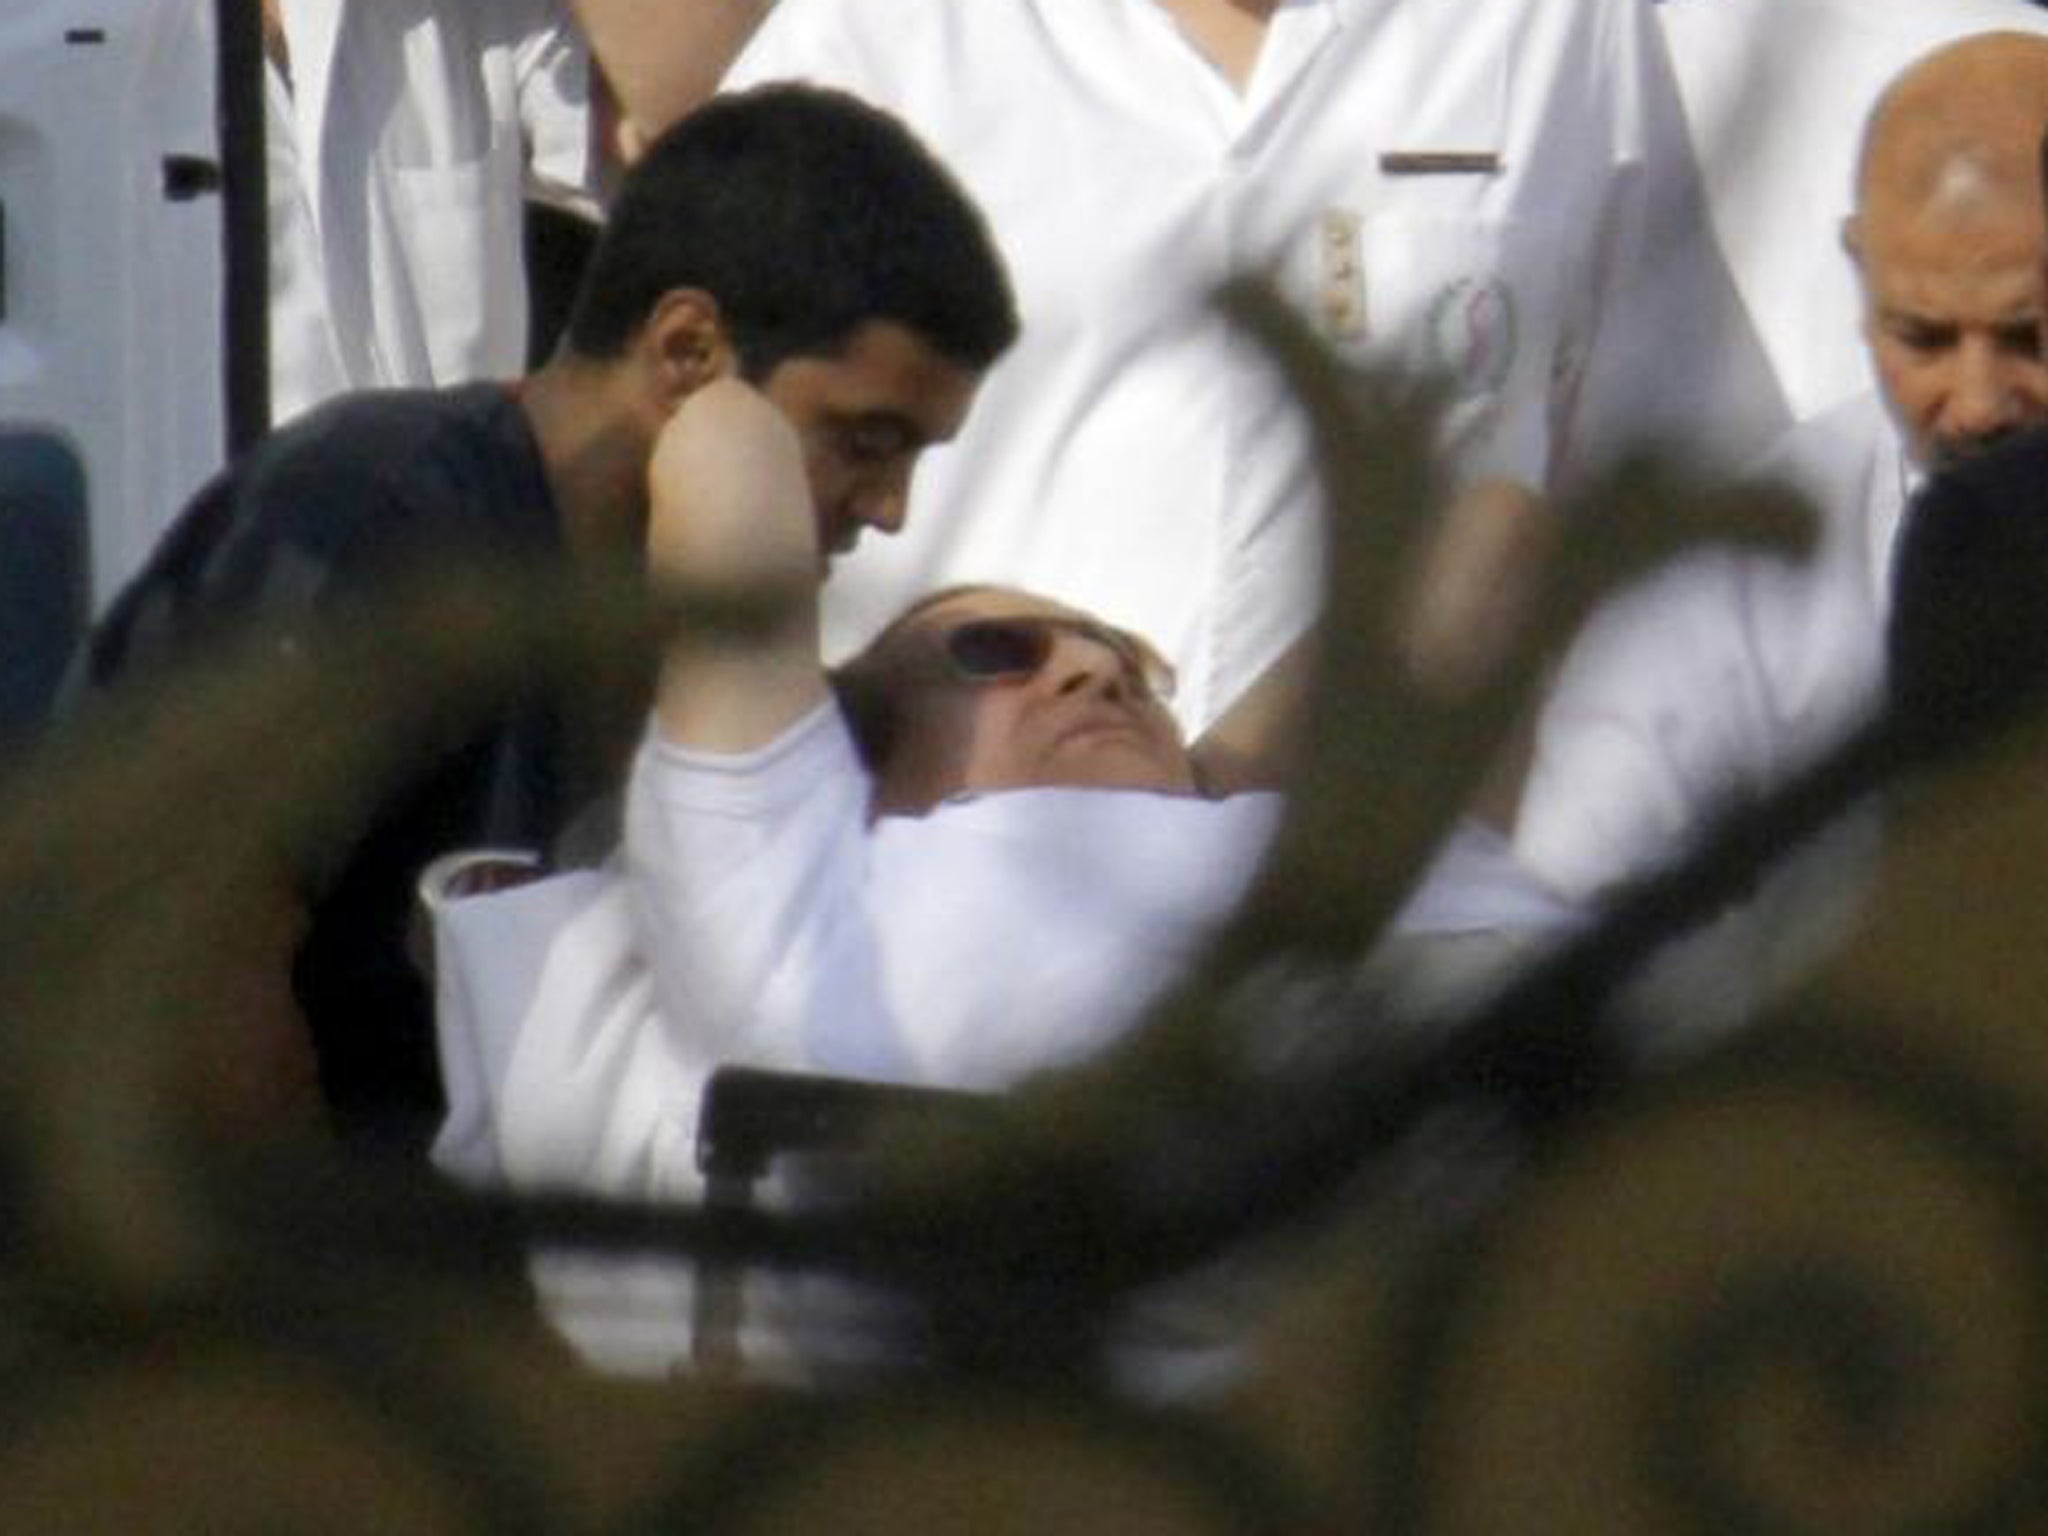 Egyptian medics escort Mubarak into an ambulance after he was flown by a helicopter ambulance to the Maadi Military Hospital from Torah prison in Cairo